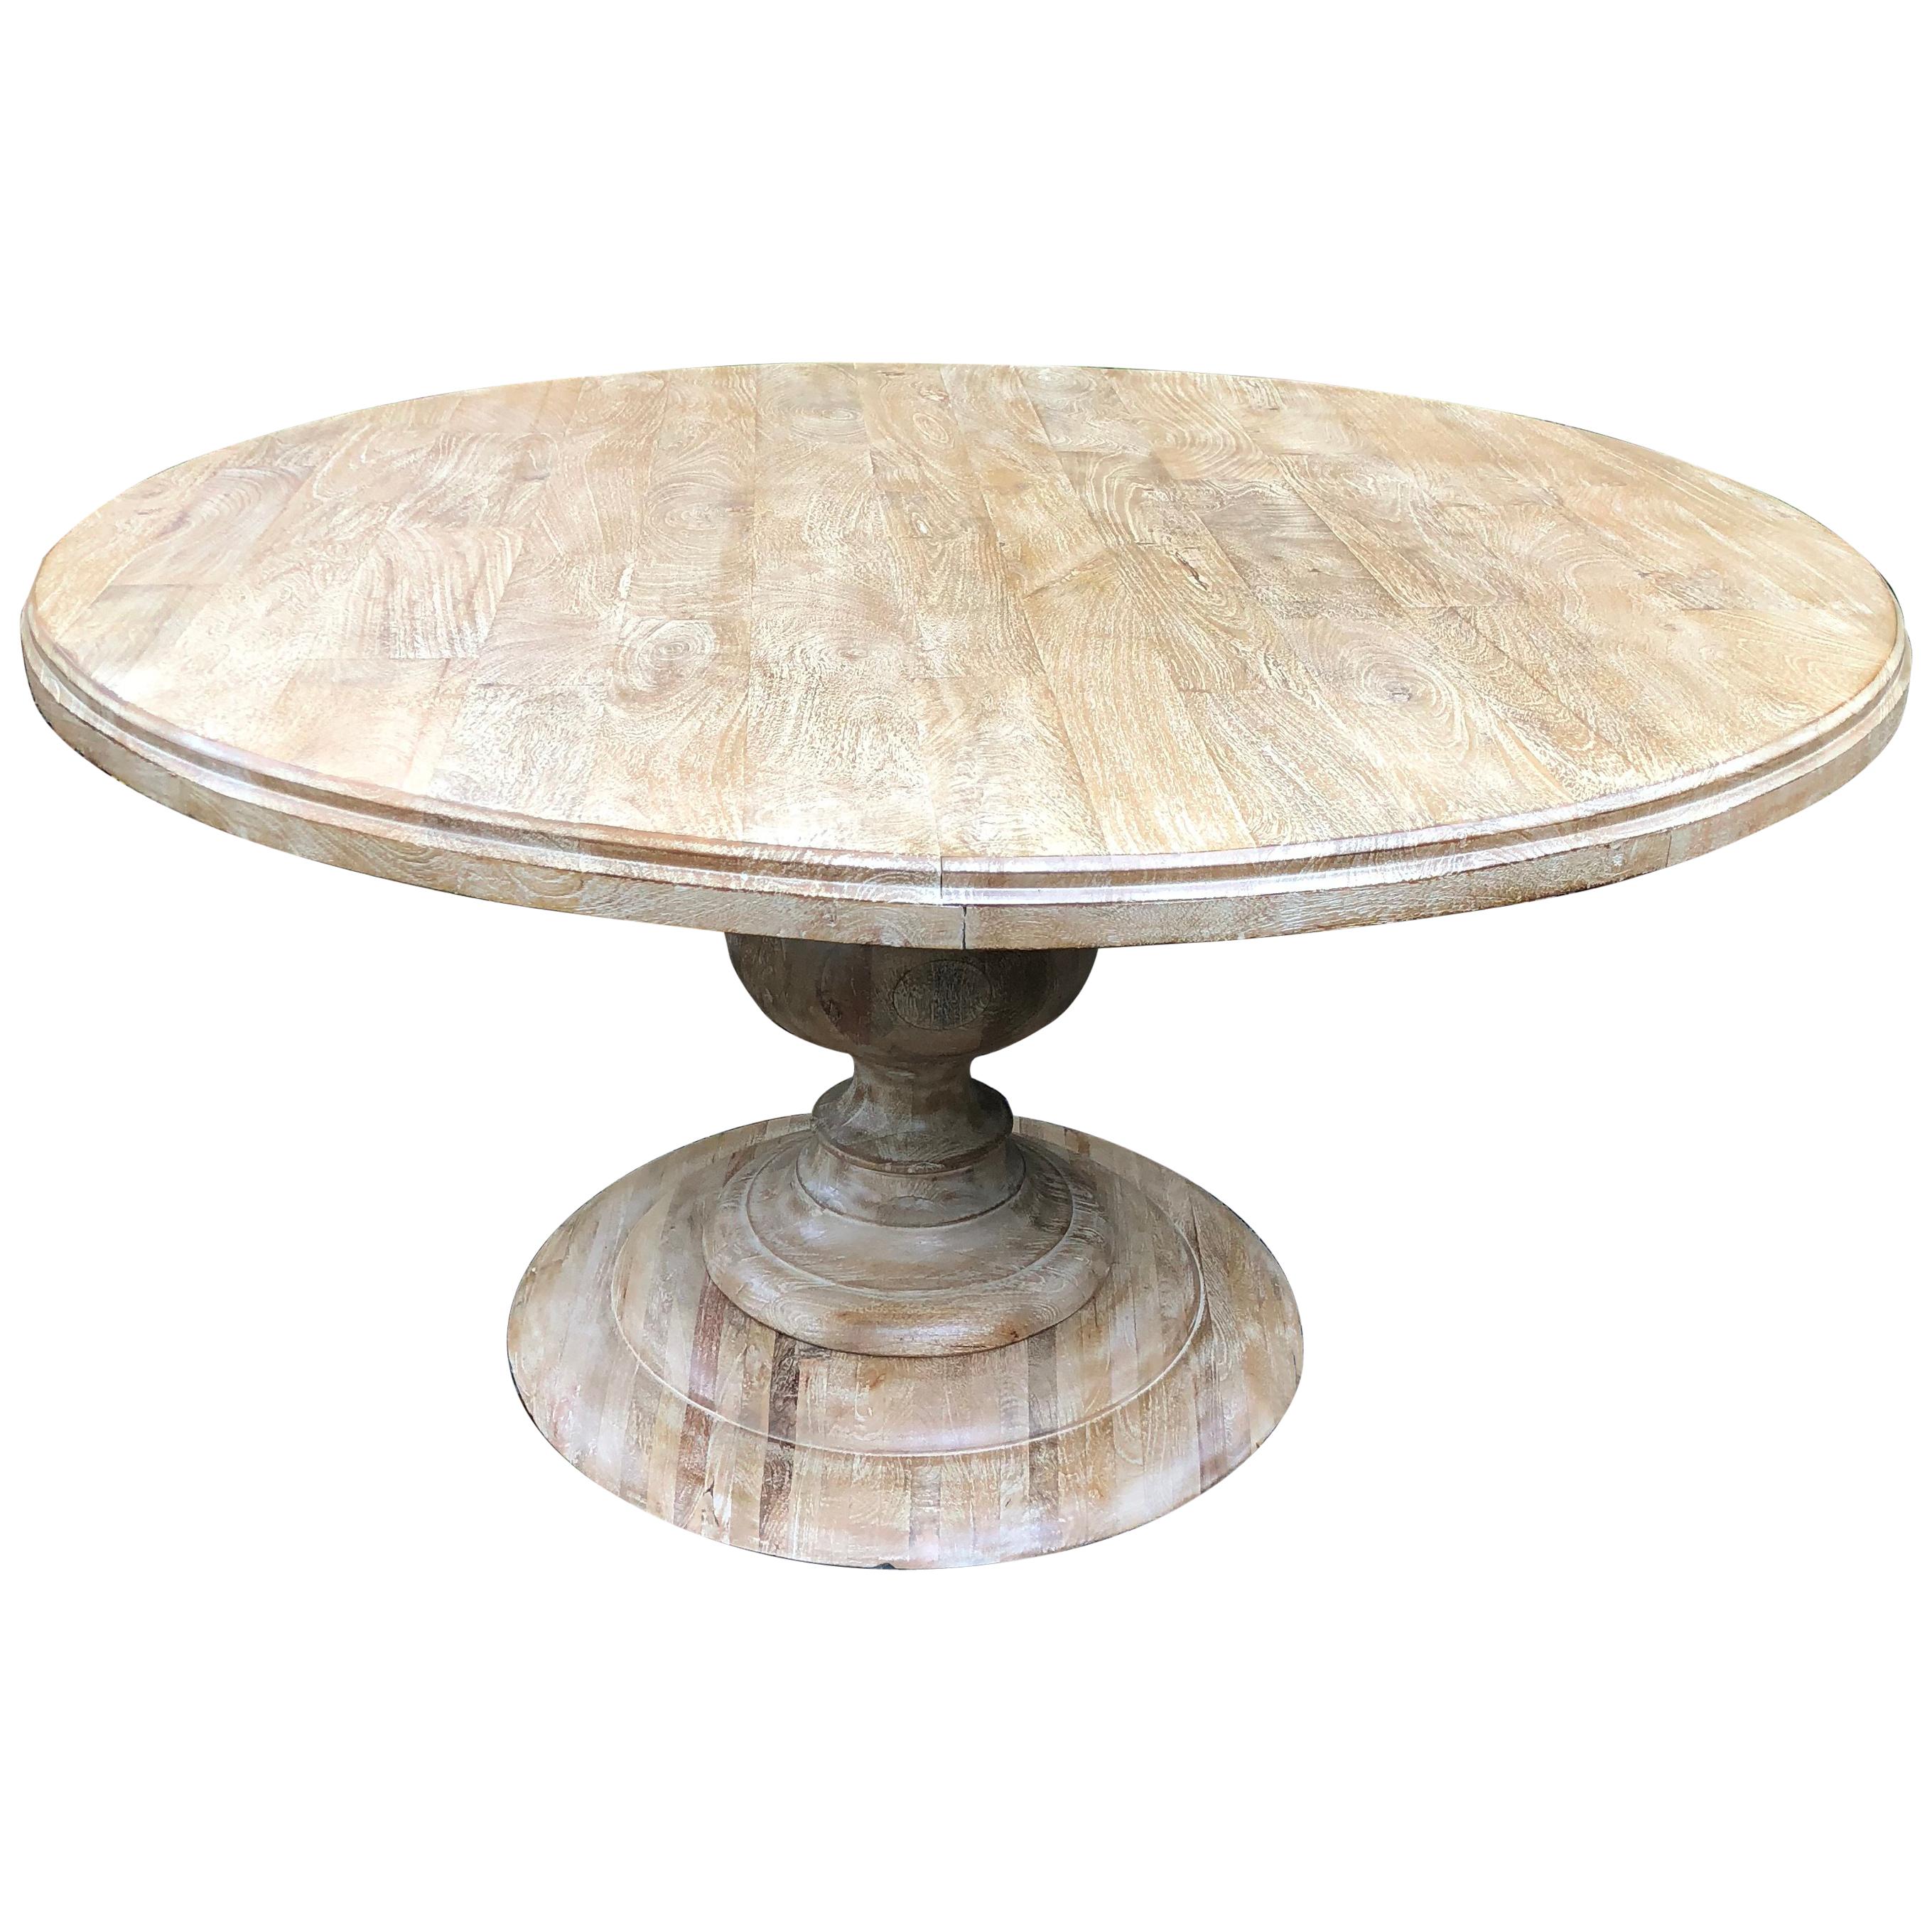 Custom Round Bleached Elm Dining Table with Urn Pedestal Base